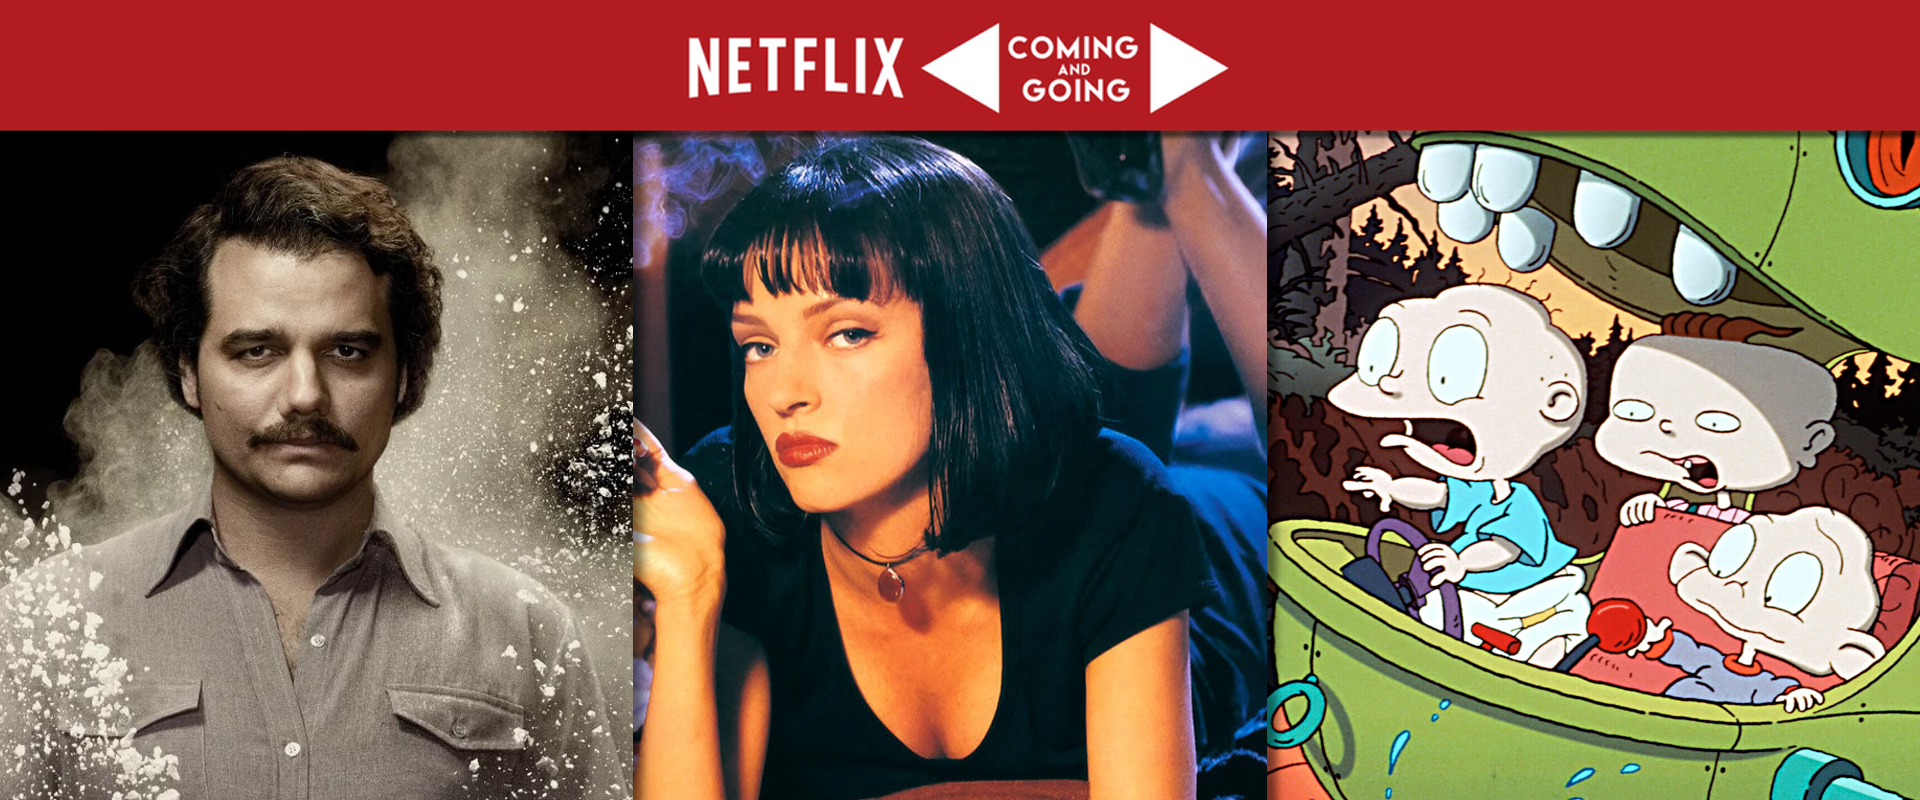 Netflix in september: everything coming and going